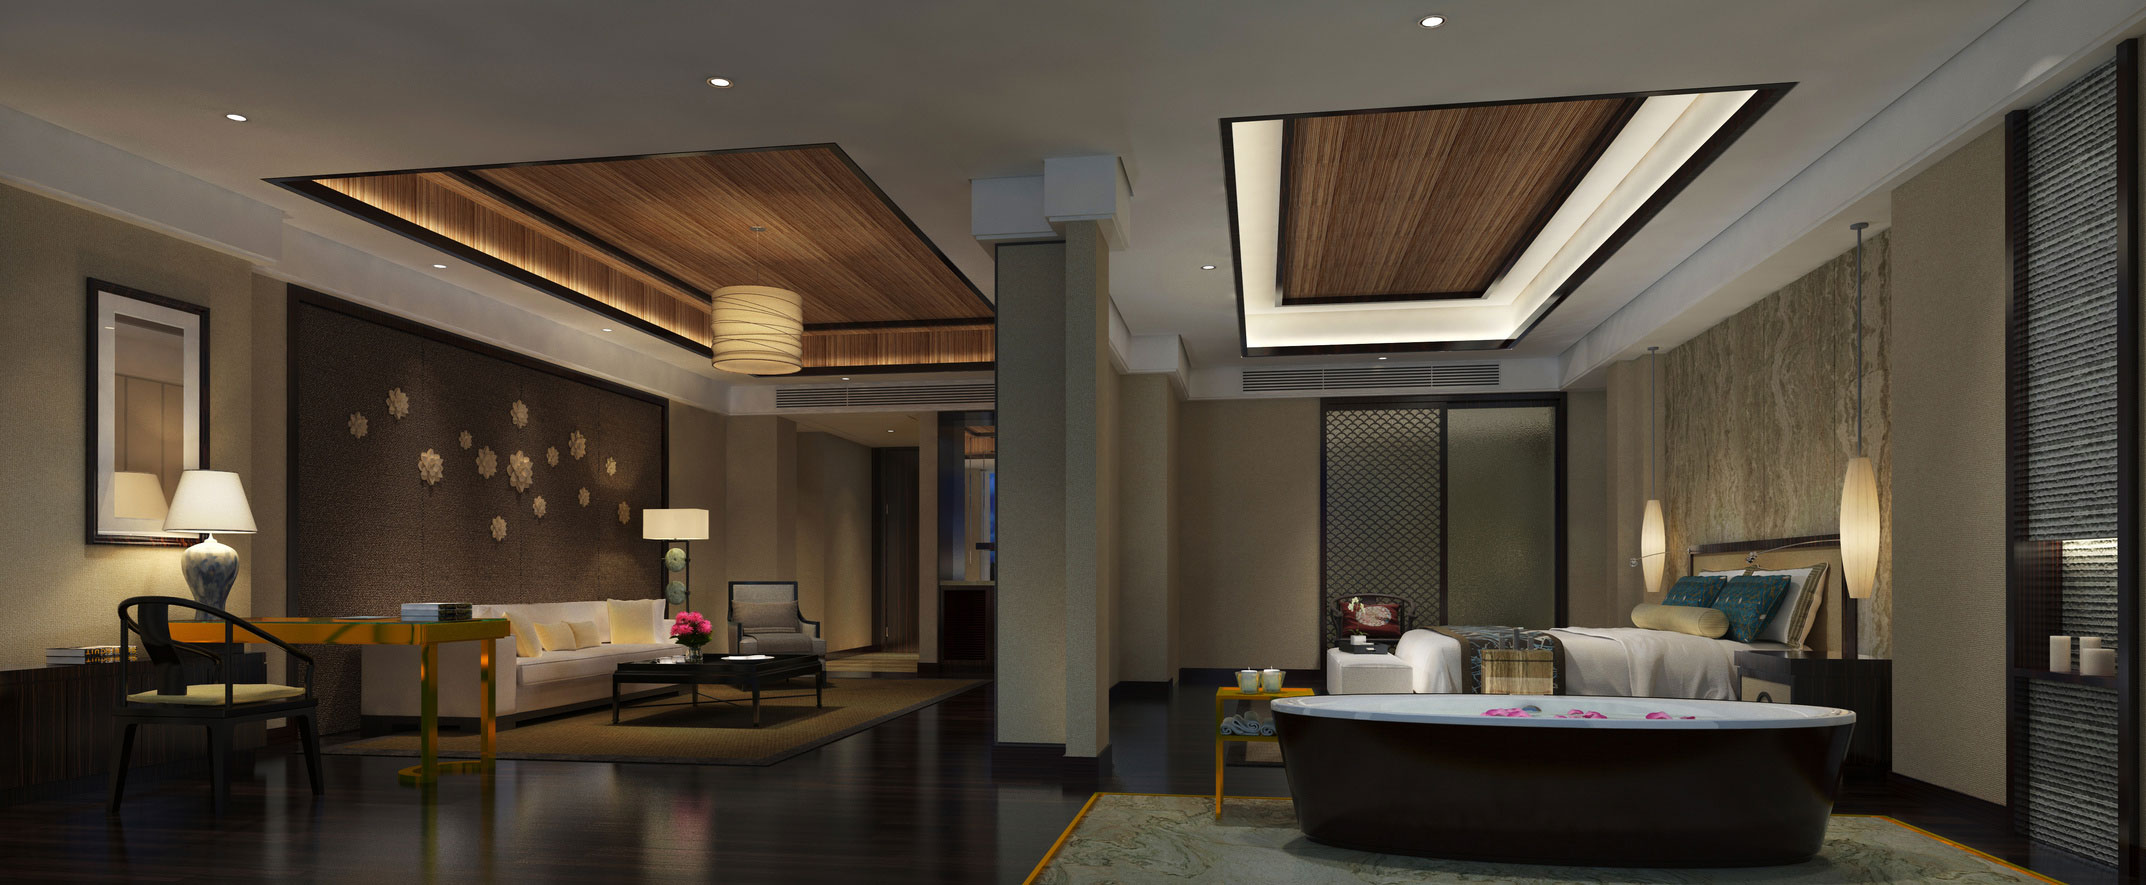 New Lifestyle Hotels Headed to Los Angeles